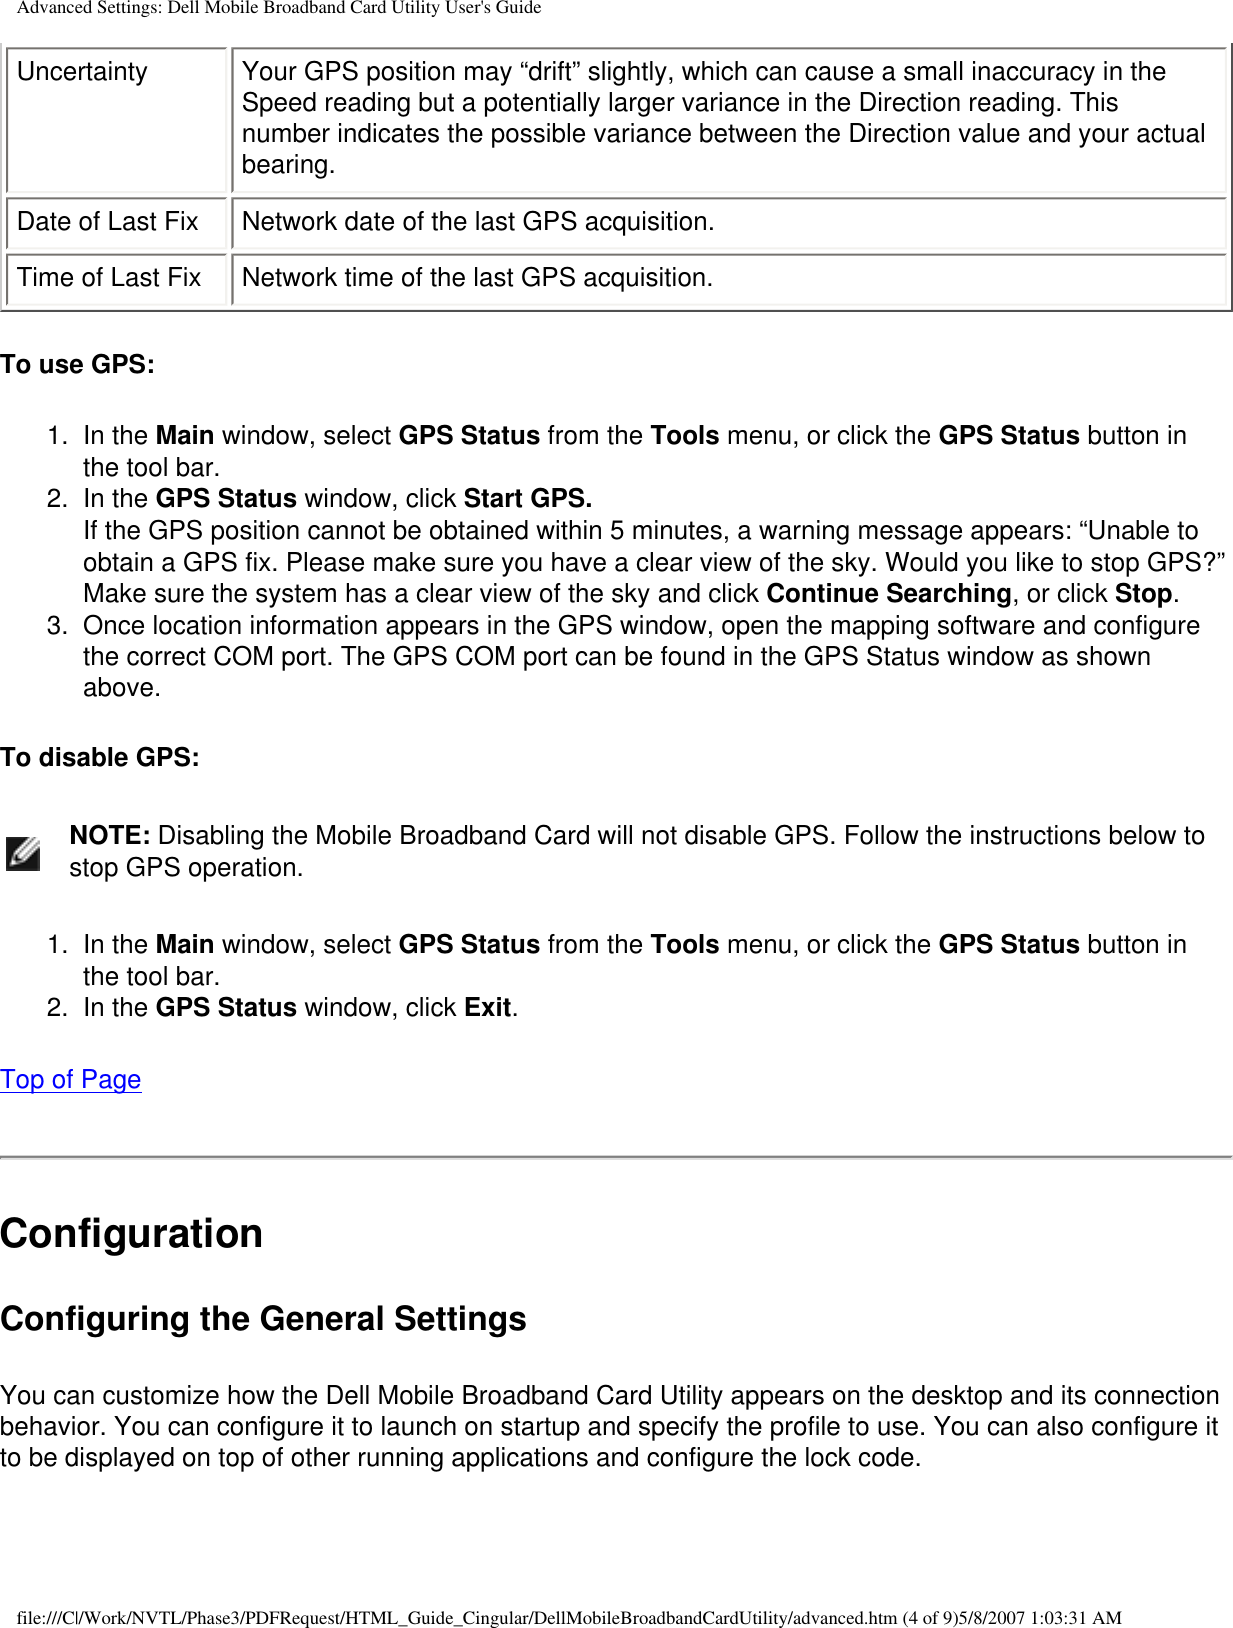 Advanced Settings: Dell Mobile Broadband Card Utility User&apos;s GuideUncertainty Your GPS position may “drift” slightly, which can cause a small inaccuracy in the Speed reading but a potentially larger variance in the Direction reading. This number indicates the possible variance between the Direction value and your actual bearing.Date of Last Fix Network date of the last GPS acquisition.Time of Last Fix Network time of the last GPS acquisition.To use GPS:1.  In the Main window, select GPS Status from the Tools menu, or click the GPS Status button in the tool bar.2.  In the GPS Status window, click Start GPS.If the GPS position cannot be obtained within 5 minutes, a warning message appears: “Unable to obtain a GPS fix. Please make sure you have a clear view of the sky. Would you like to stop GPS?” Make sure the system has a clear view of the sky and click Continue Searching, or click Stop. 3.  Once location information appears in the GPS window, open the mapping software and configure the correct COM port. The GPS COM port can be found in the GPS Status window as shown above.To disable GPS:    NOTE: Disabling the Mobile Broadband Card will not disable GPS. Follow the instructions below to stop GPS operation.1.  In the Main window, select GPS Status from the Tools menu, or click the GPS Status button in the tool bar.2.  In the GPS Status window, click Exit.Top of PageConfigurationConfiguring the General SettingsYou can customize how the Dell Mobile Broadband Card Utility appears on the desktop and its connection behavior. You can configure it to launch on startup and specify the profile to use. You can also configure it to be displayed on top of other running applications and configure the lock code.file:///C|/Work/NVTL/Phase3/PDFRequest/HTML_Guide_Cingular/DellMobileBroadbandCardUtility/advanced.htm (4 of 9)5/8/2007 1:03:31 AM